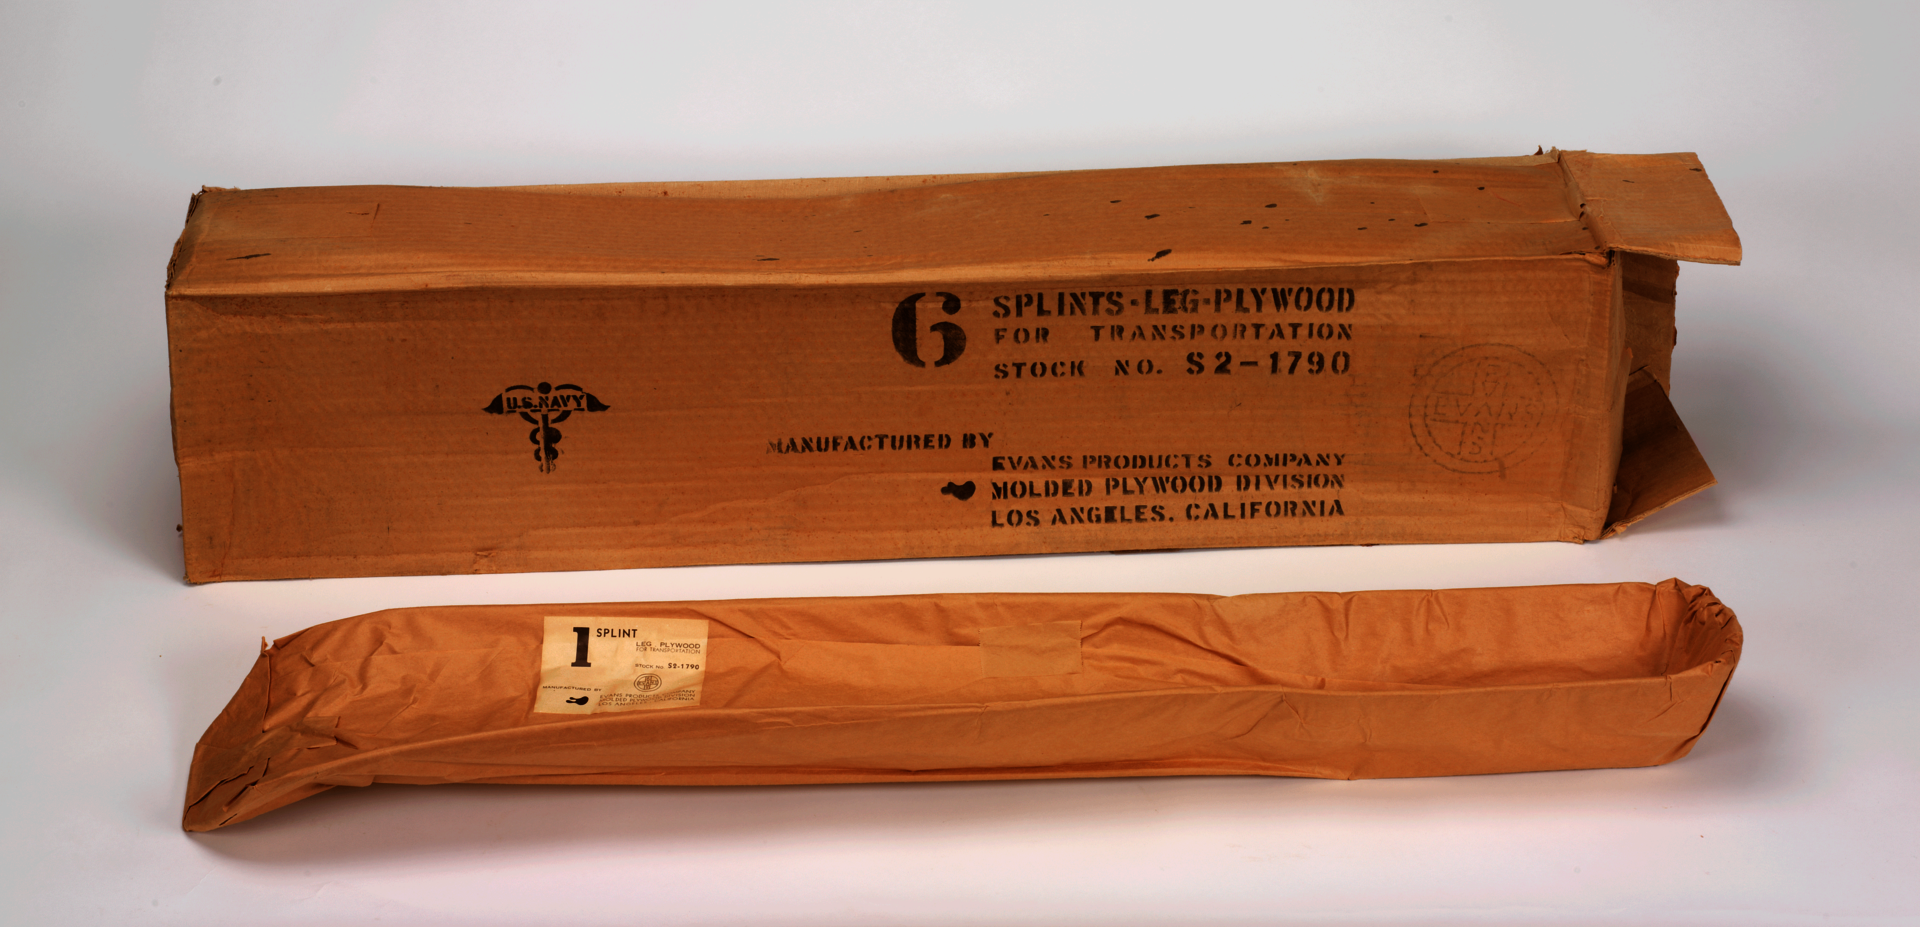 Photo of a wooden support made for leg injuries, wrapped in yellowed paper. Behind it is a cardboard box labeled with the details about the device.